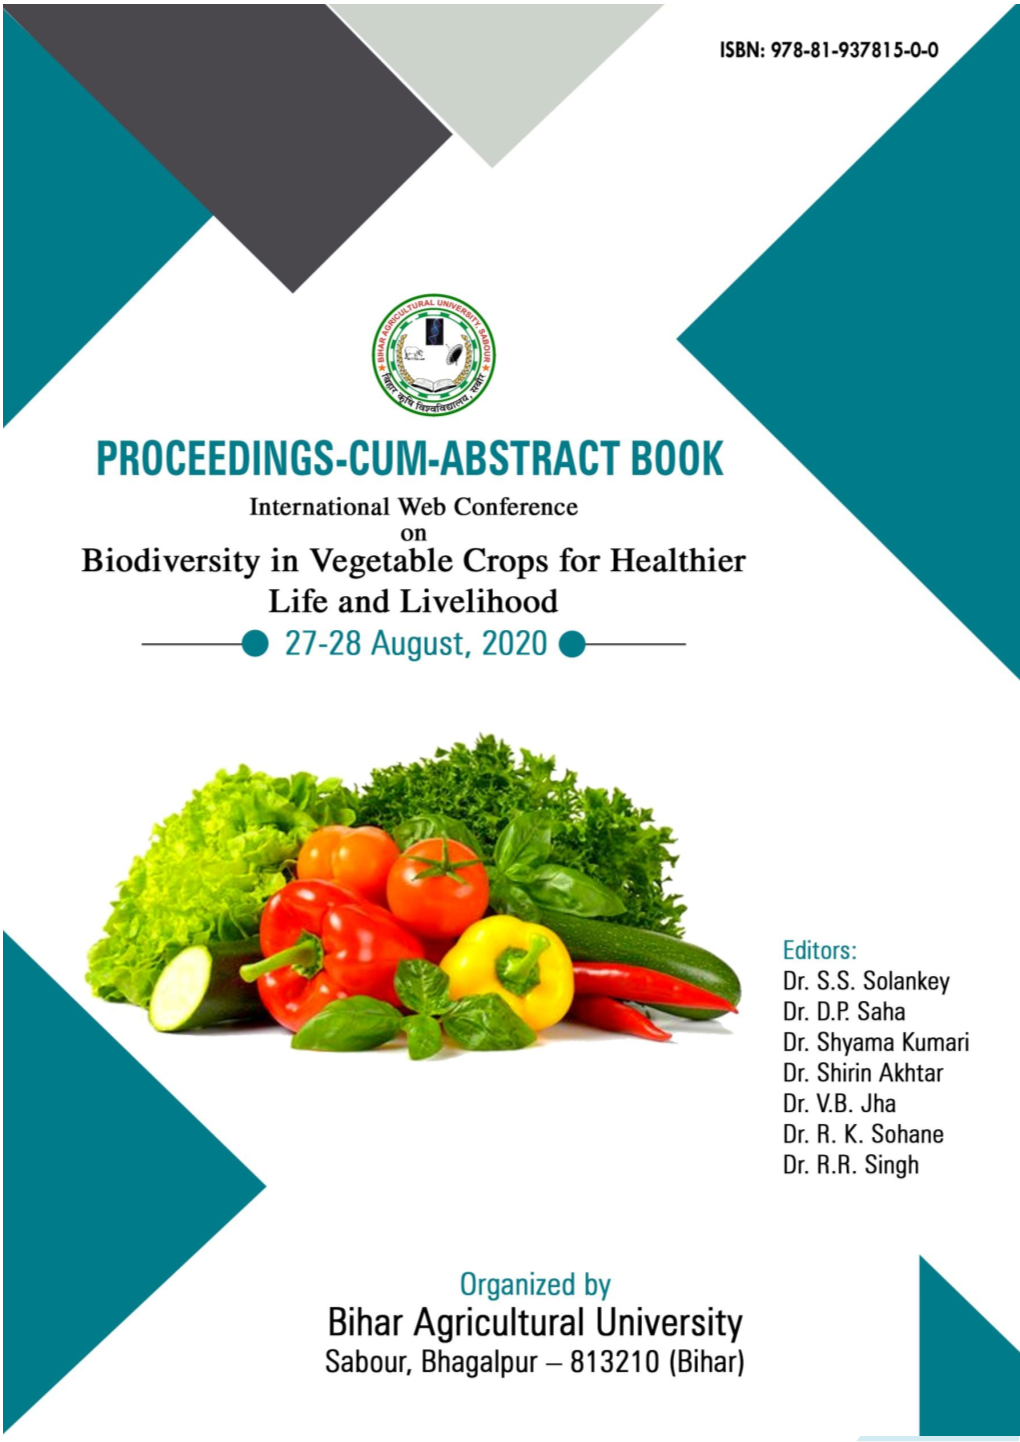 Biodiversity in Vegetable Crops for Healthier Life and Livelihood” 27-28 August, 2020, Bihar Agricultural University, Sabour, Bhagalpur